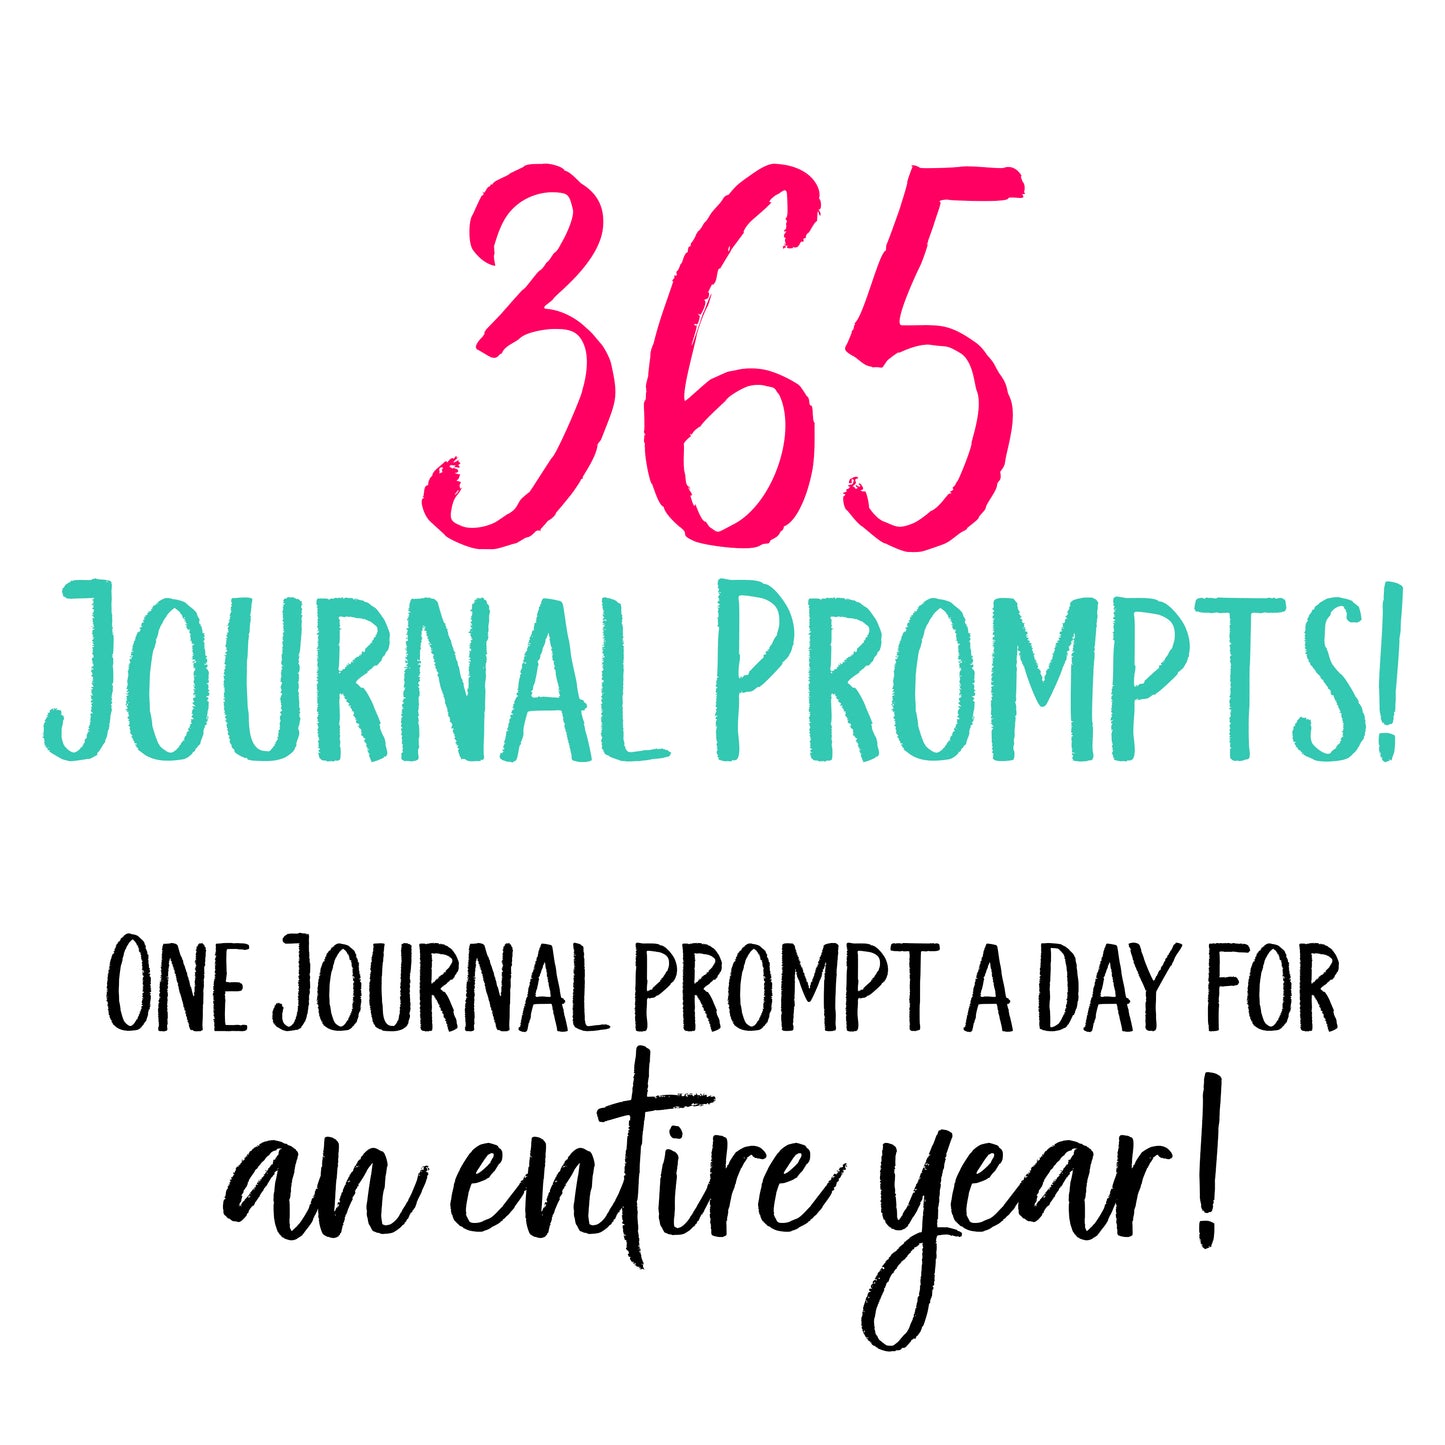 365 Journal Prompt Digital Set - 1 Entire Year of Journal Prompts!